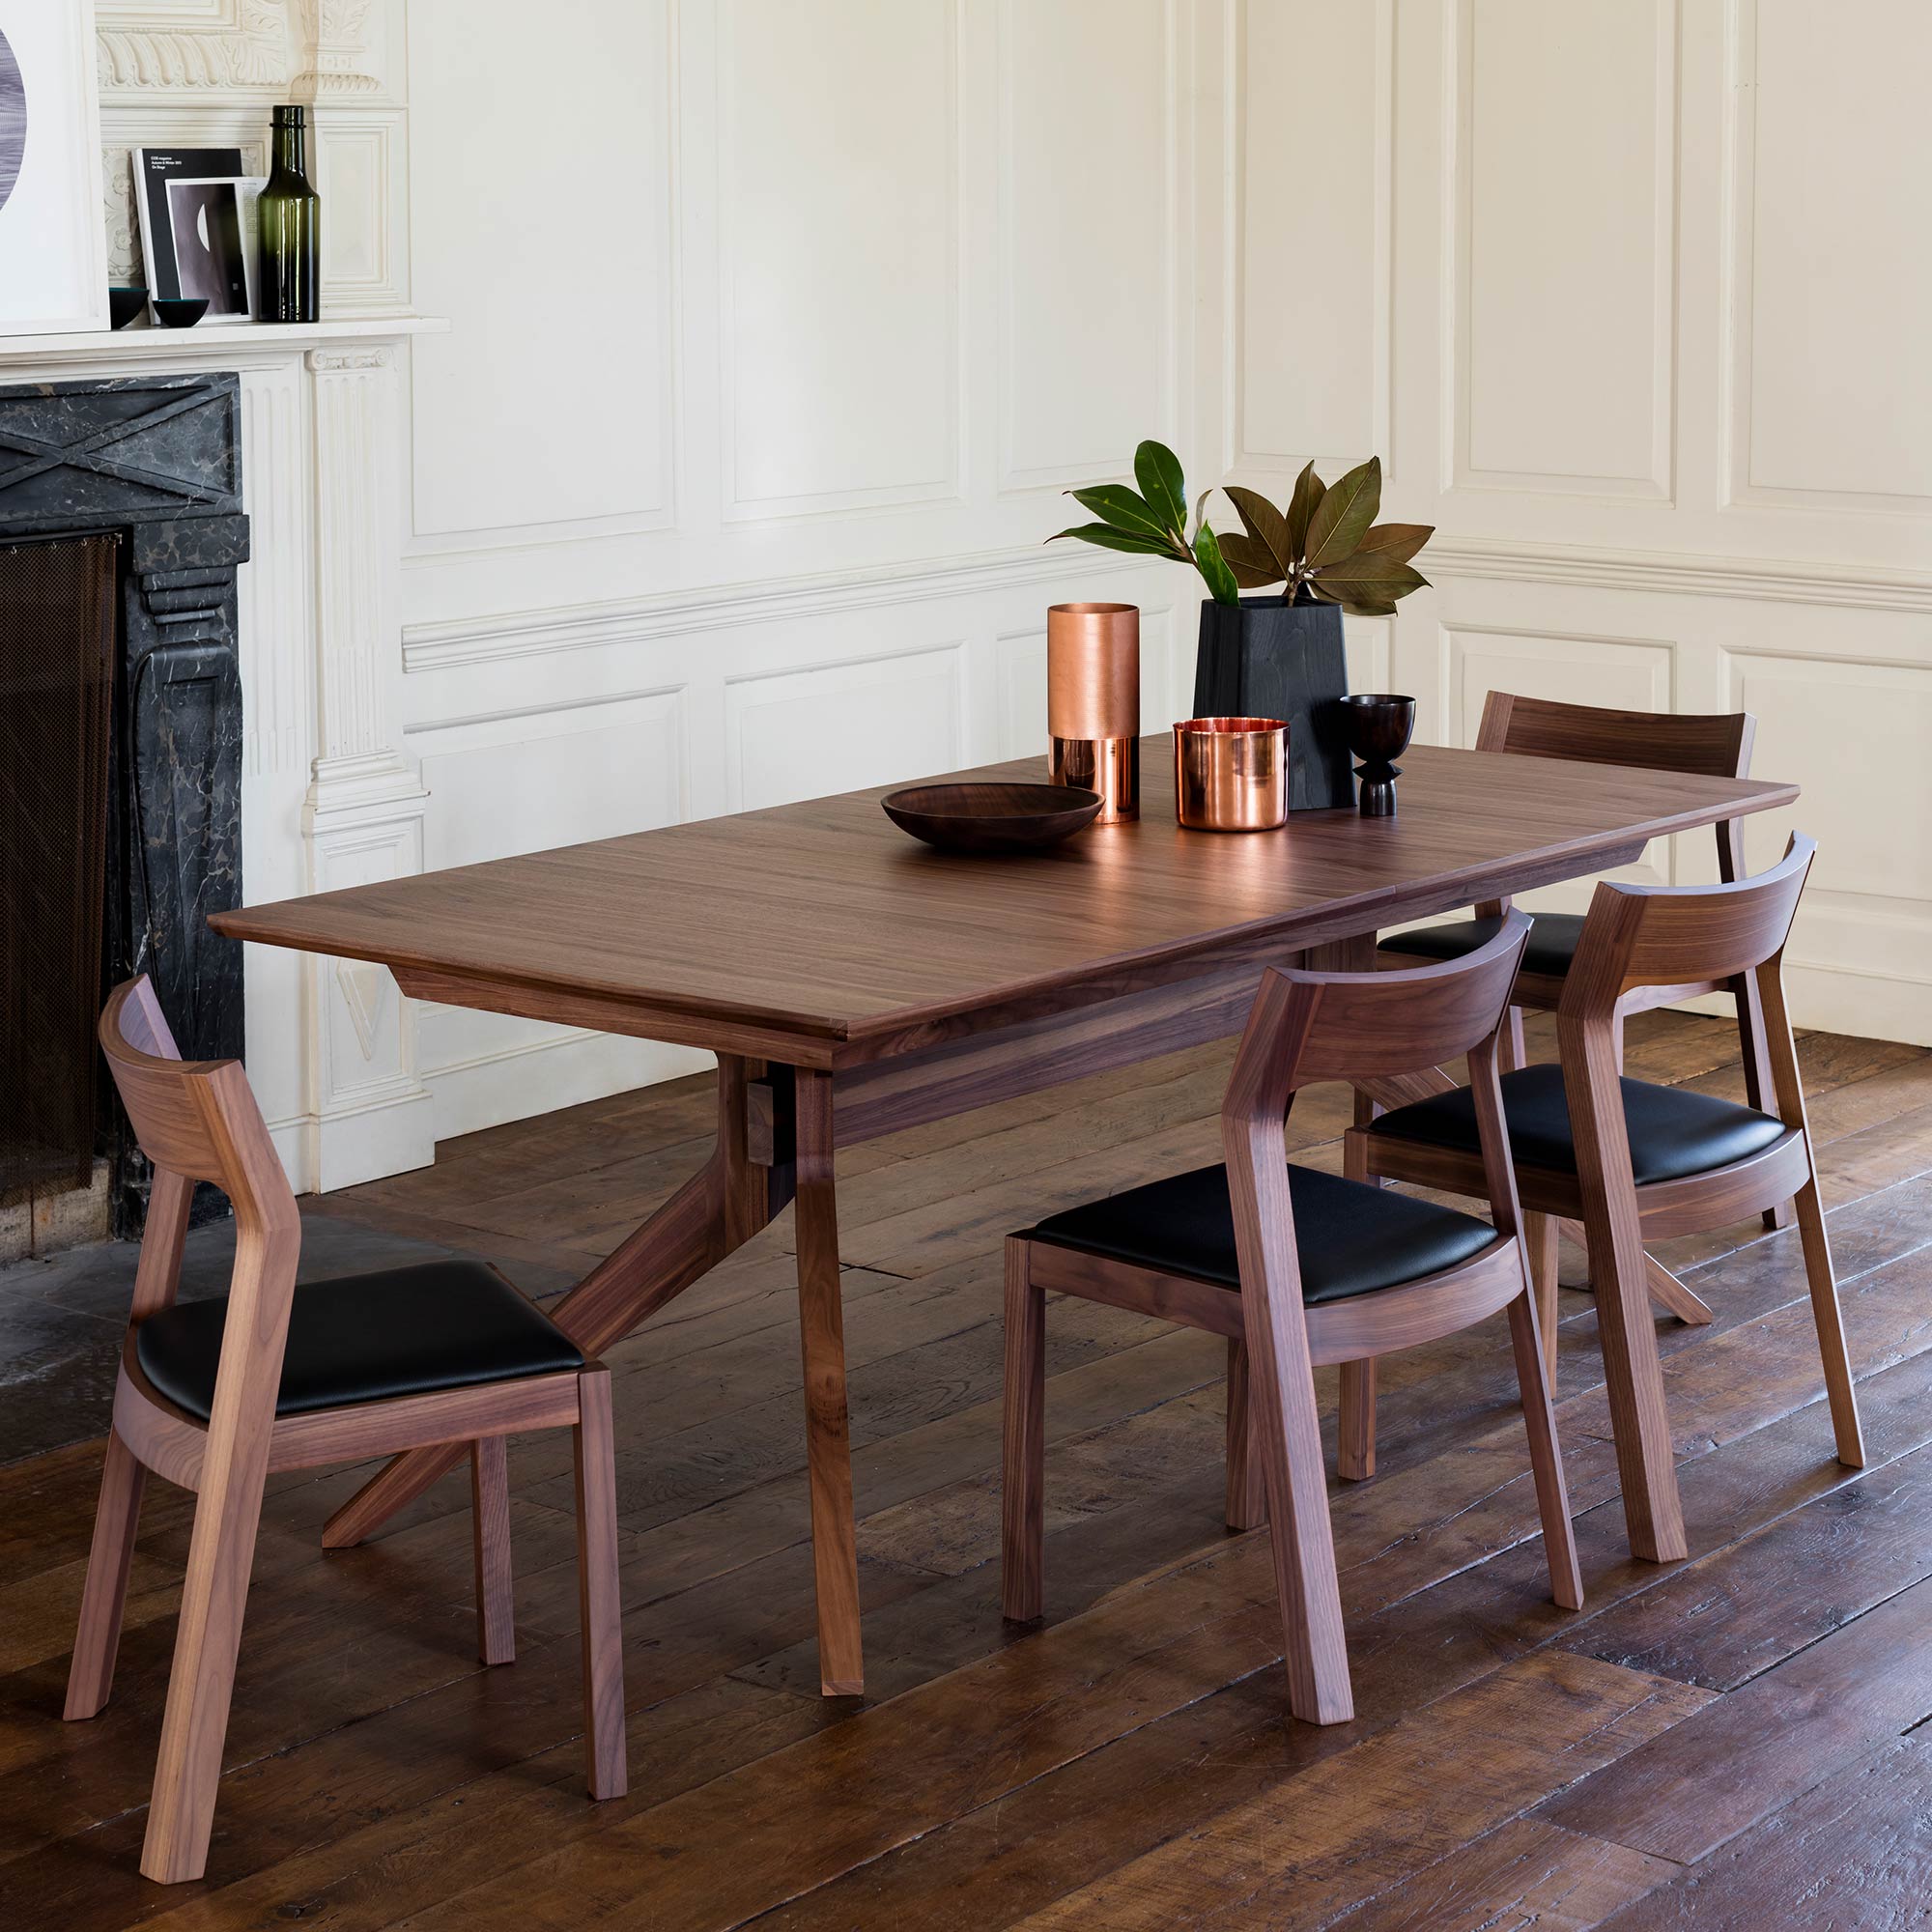 dark wooden dining table and chairs